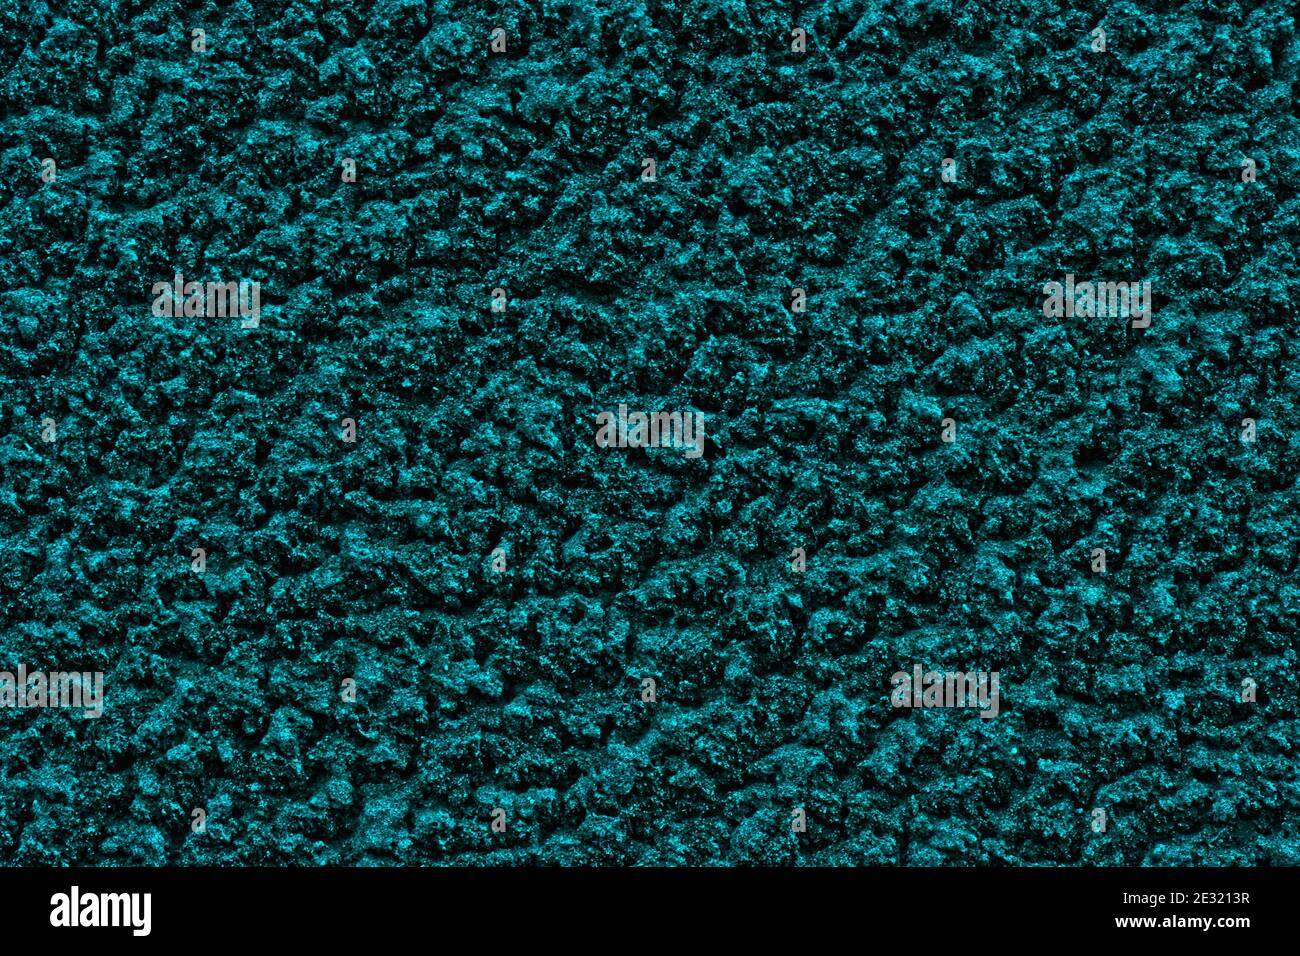 Dark cyanide solid background with rough plaster texture.  Stock Photo